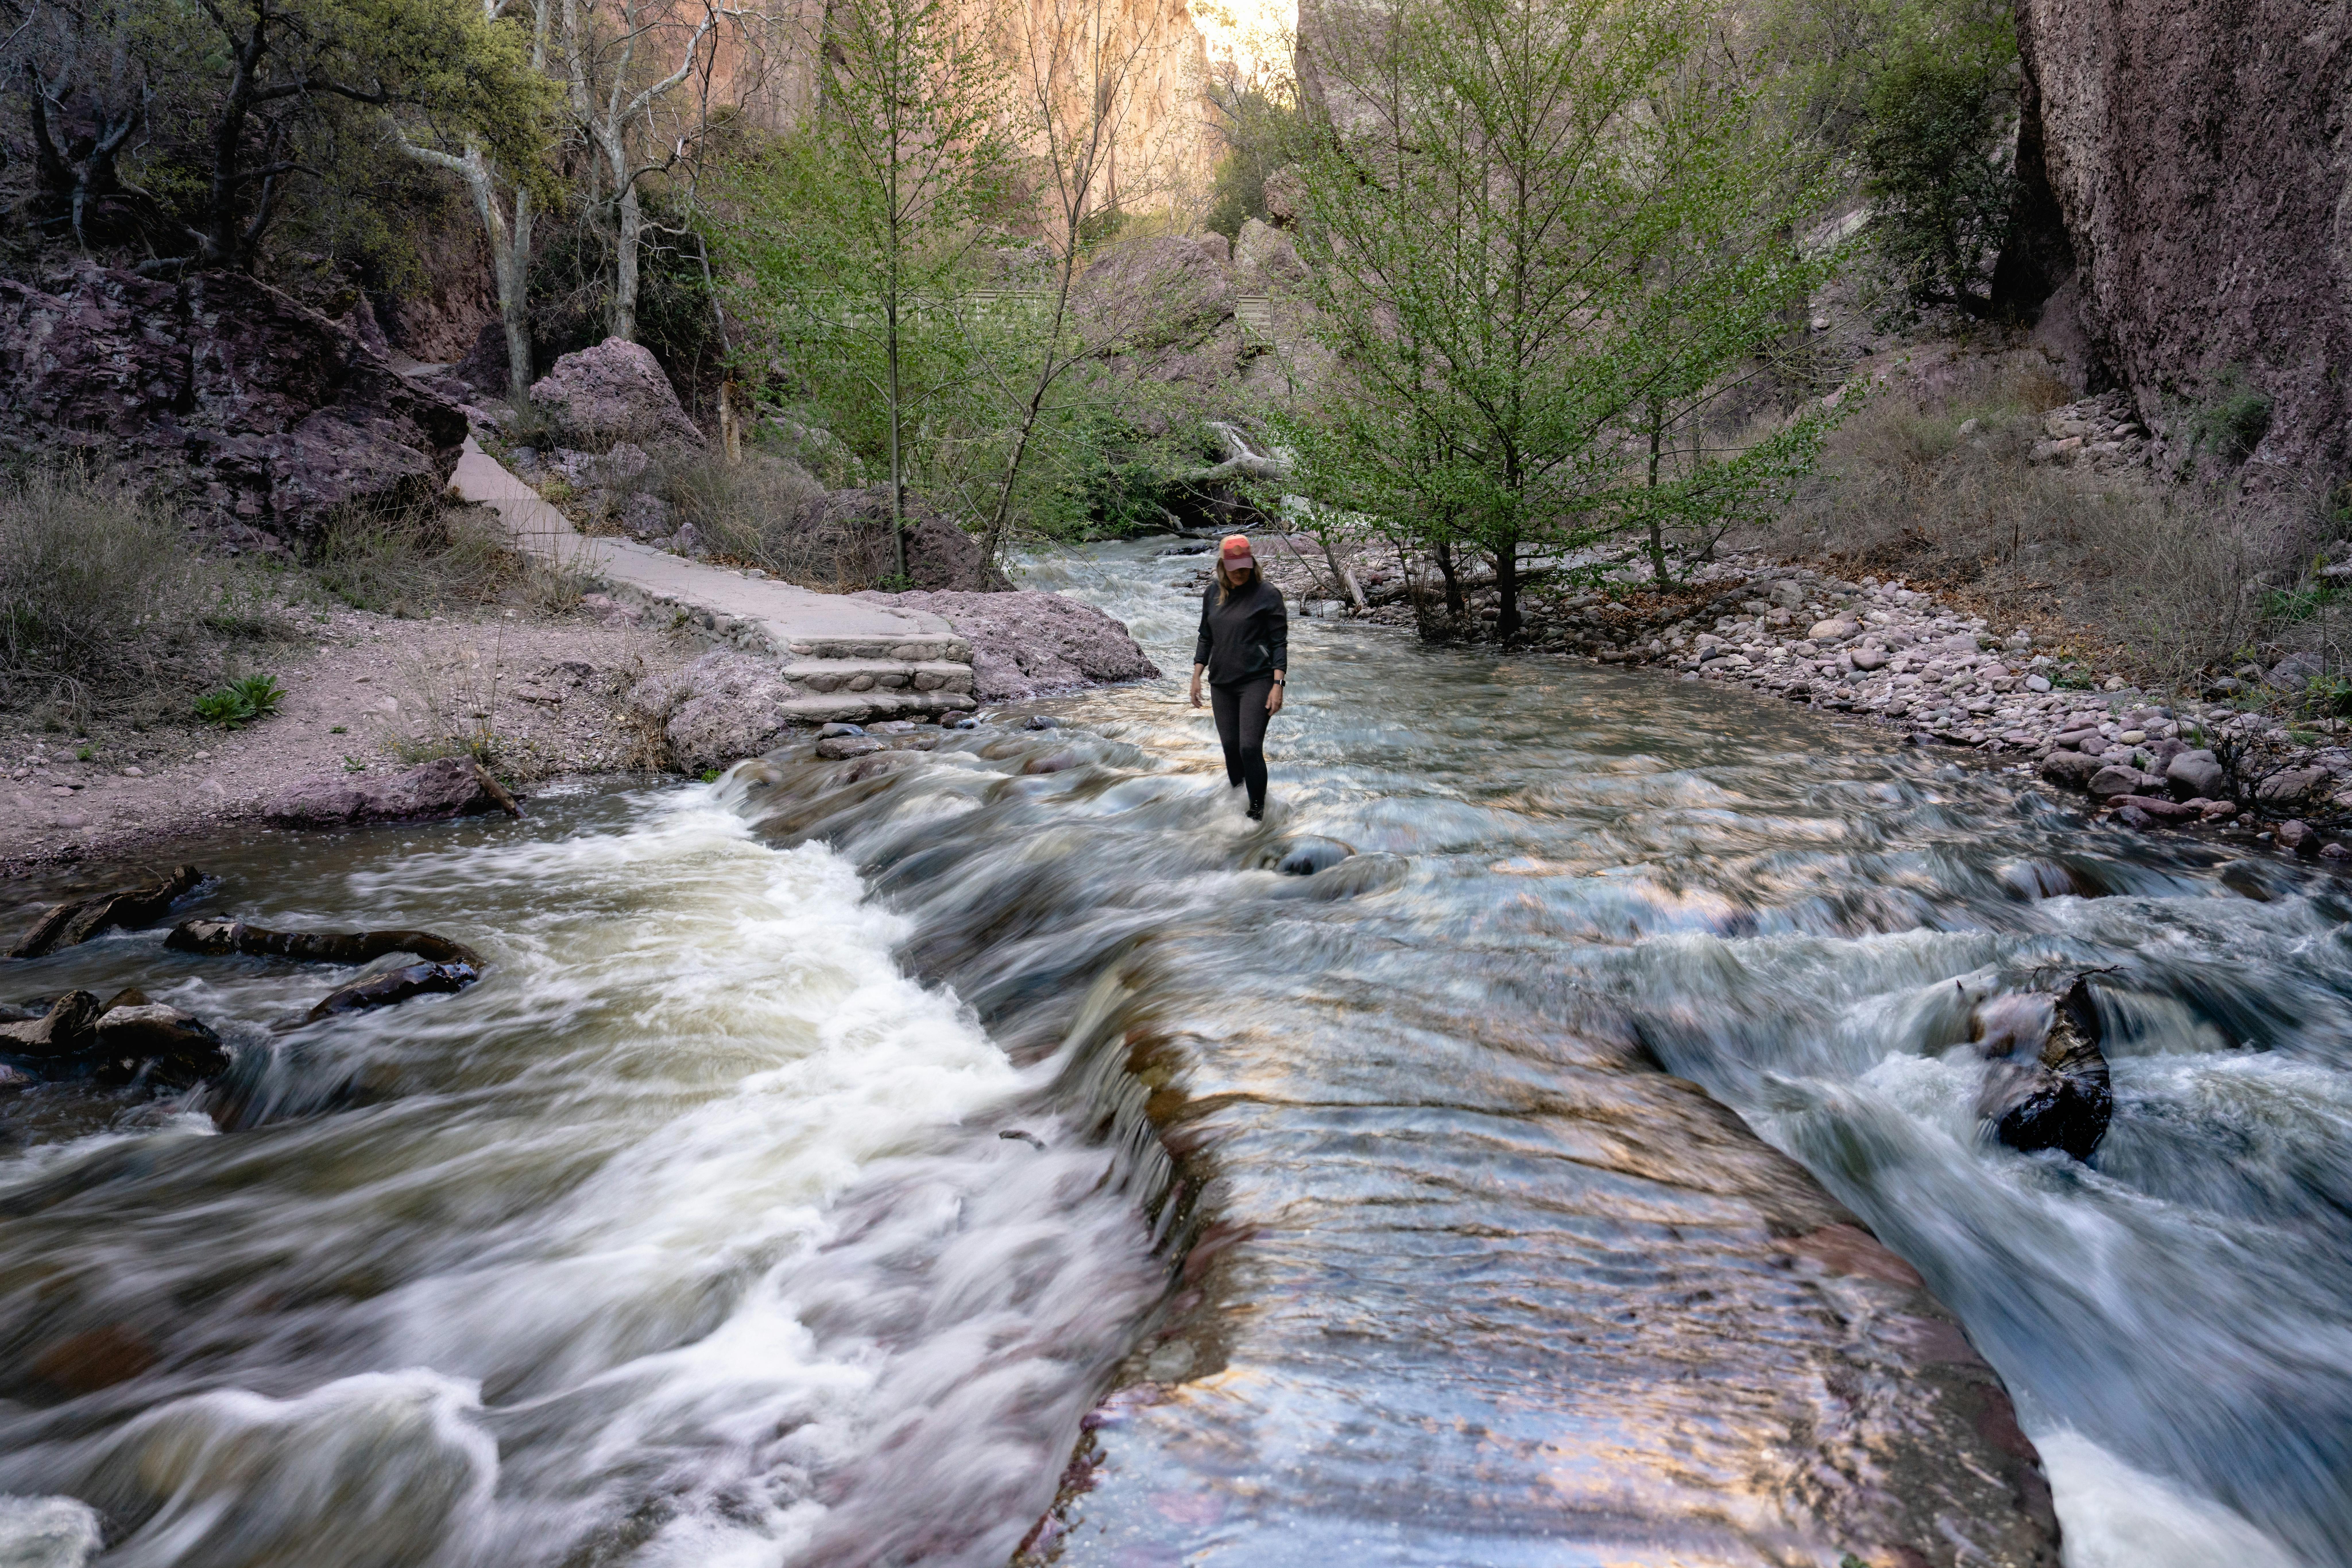 Karen Blue standing in a river in Gila National Forest.